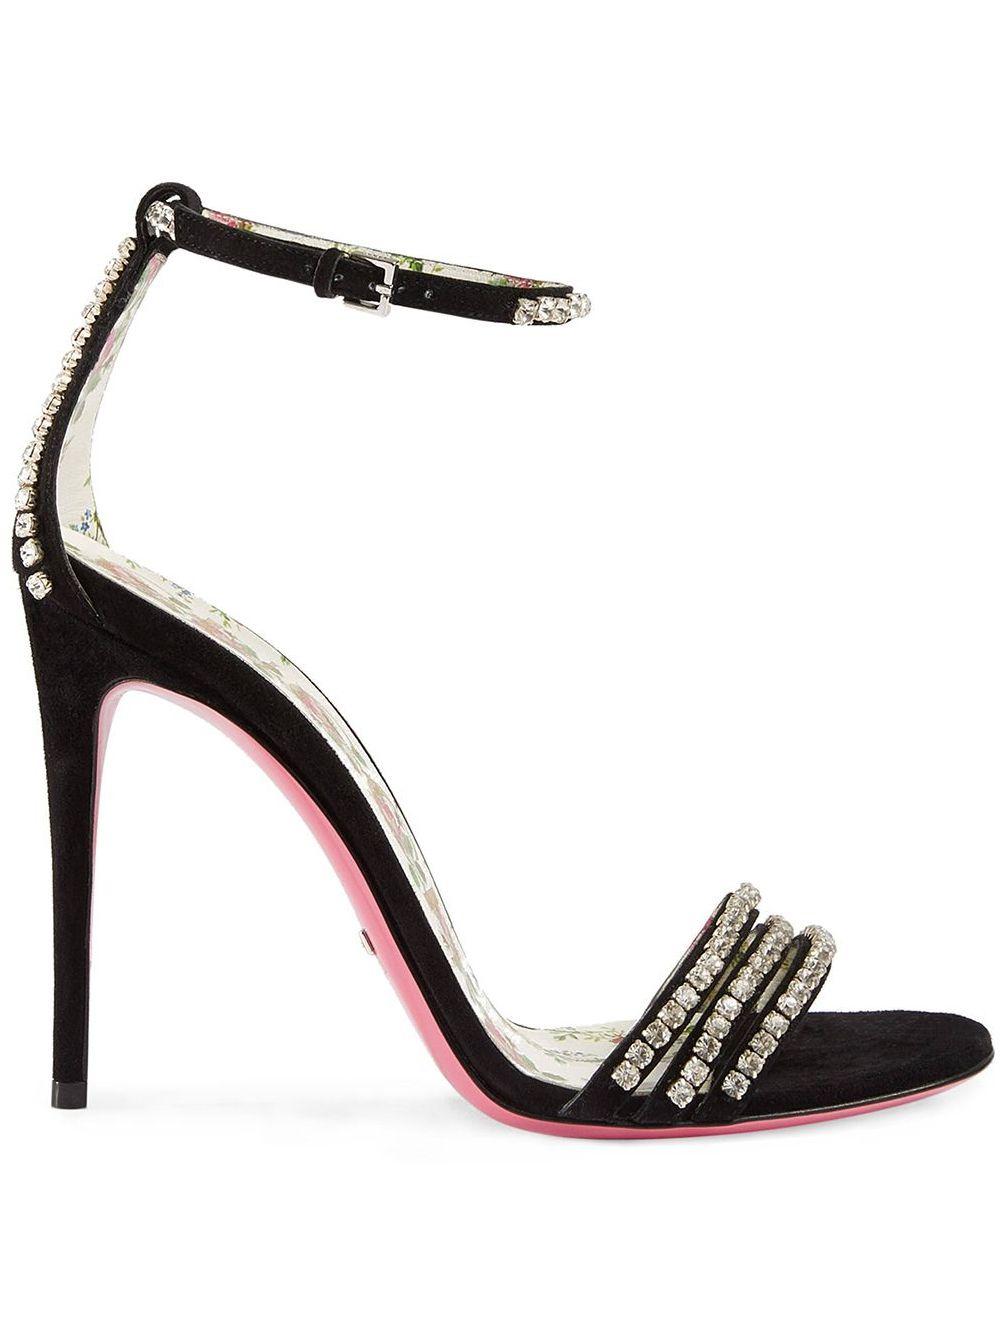 Gucci Suede Sandal With Crystals in Black - Lyst